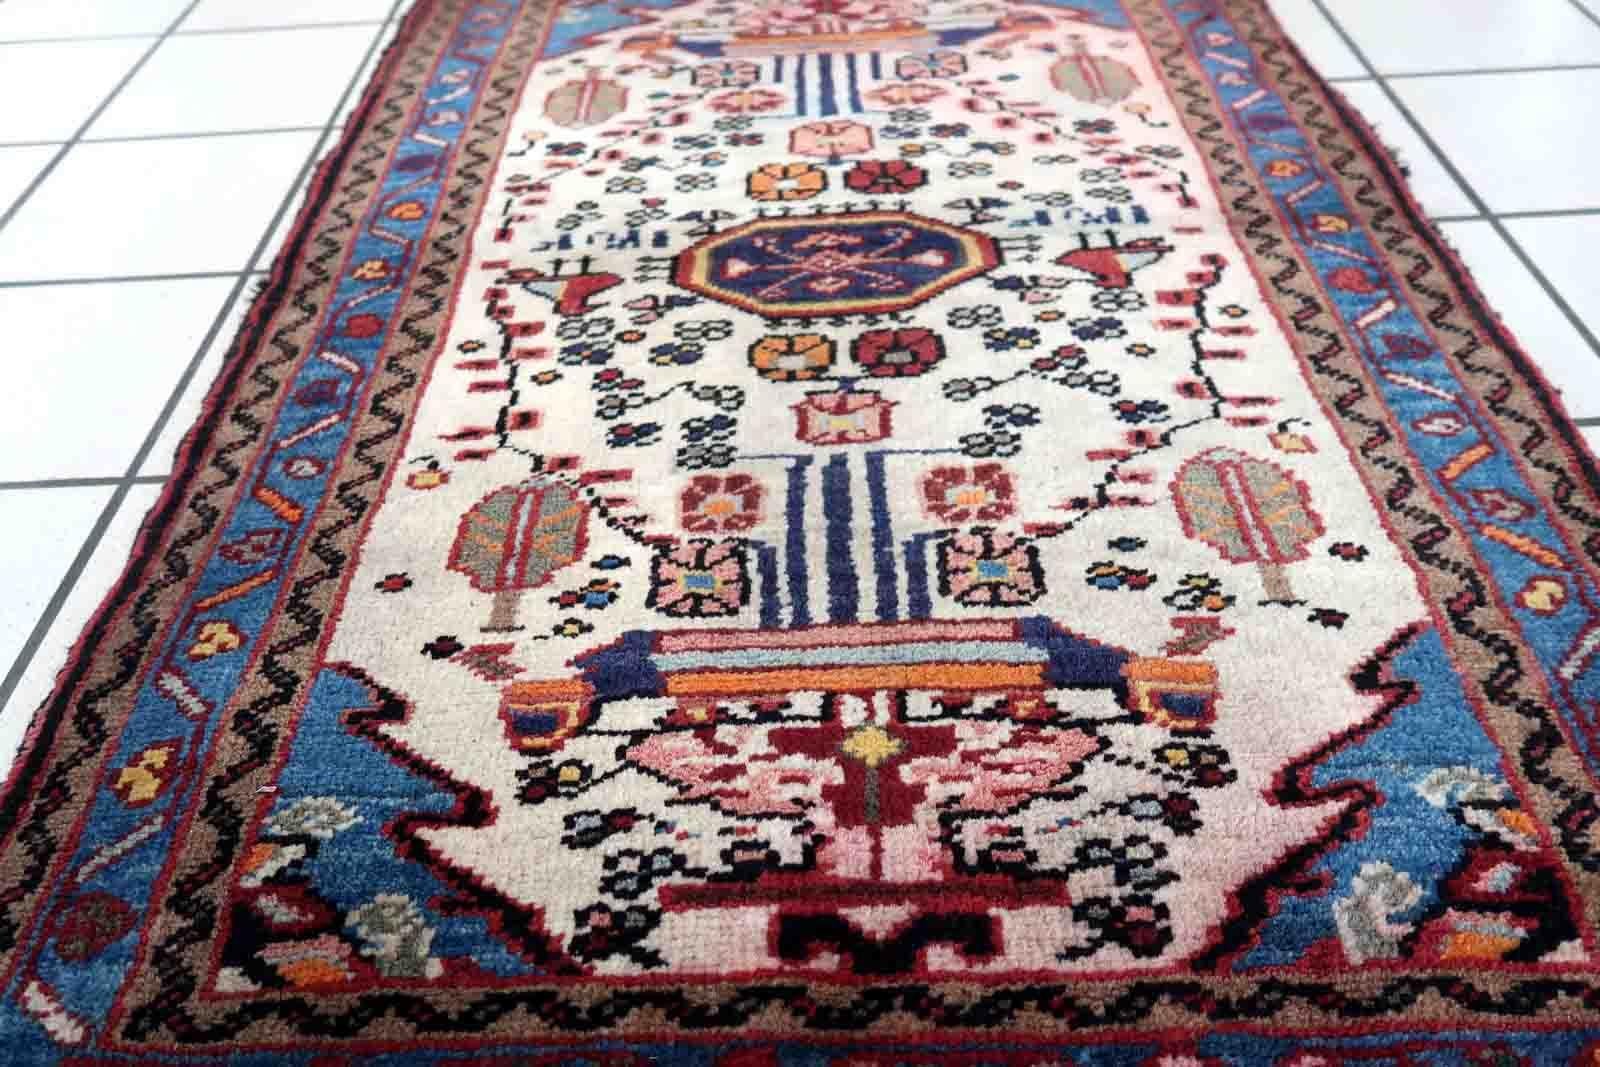 Handmade vintage Mahal ug in white color and with birds design. The rug is from the end of 20th century in original condition, it has some color run.

-condition: original, some color run,

-circa: 1970s,

-size: 2.3' x 3.5' (72cm x